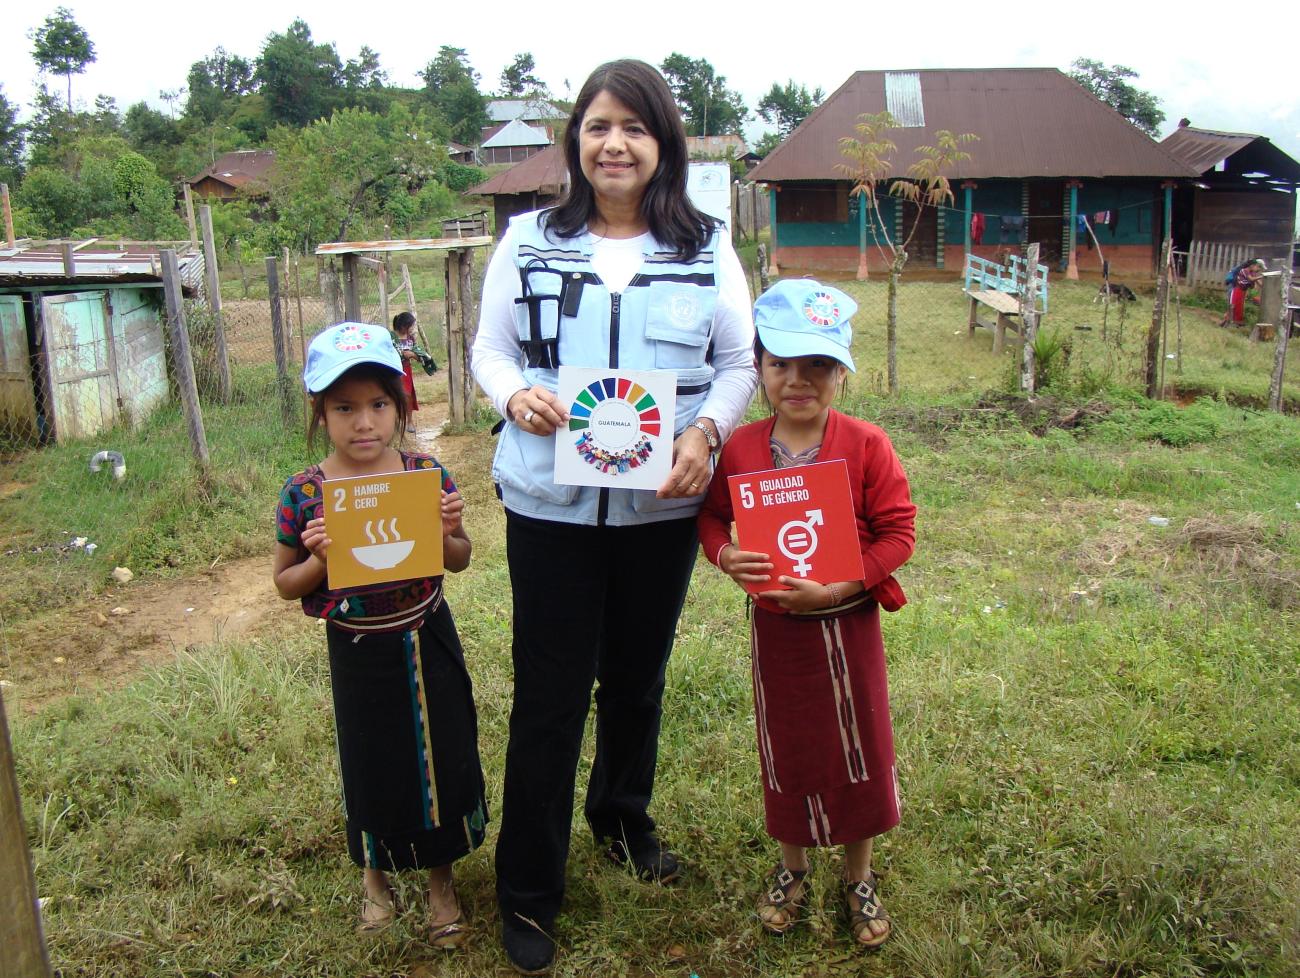 Resident Coordinator in Guatemala, Rebeca Arias Flores, promoting the Sustainable Development Goals with the help of two young children in Nebaj, Quiché, during a burial ceremony.